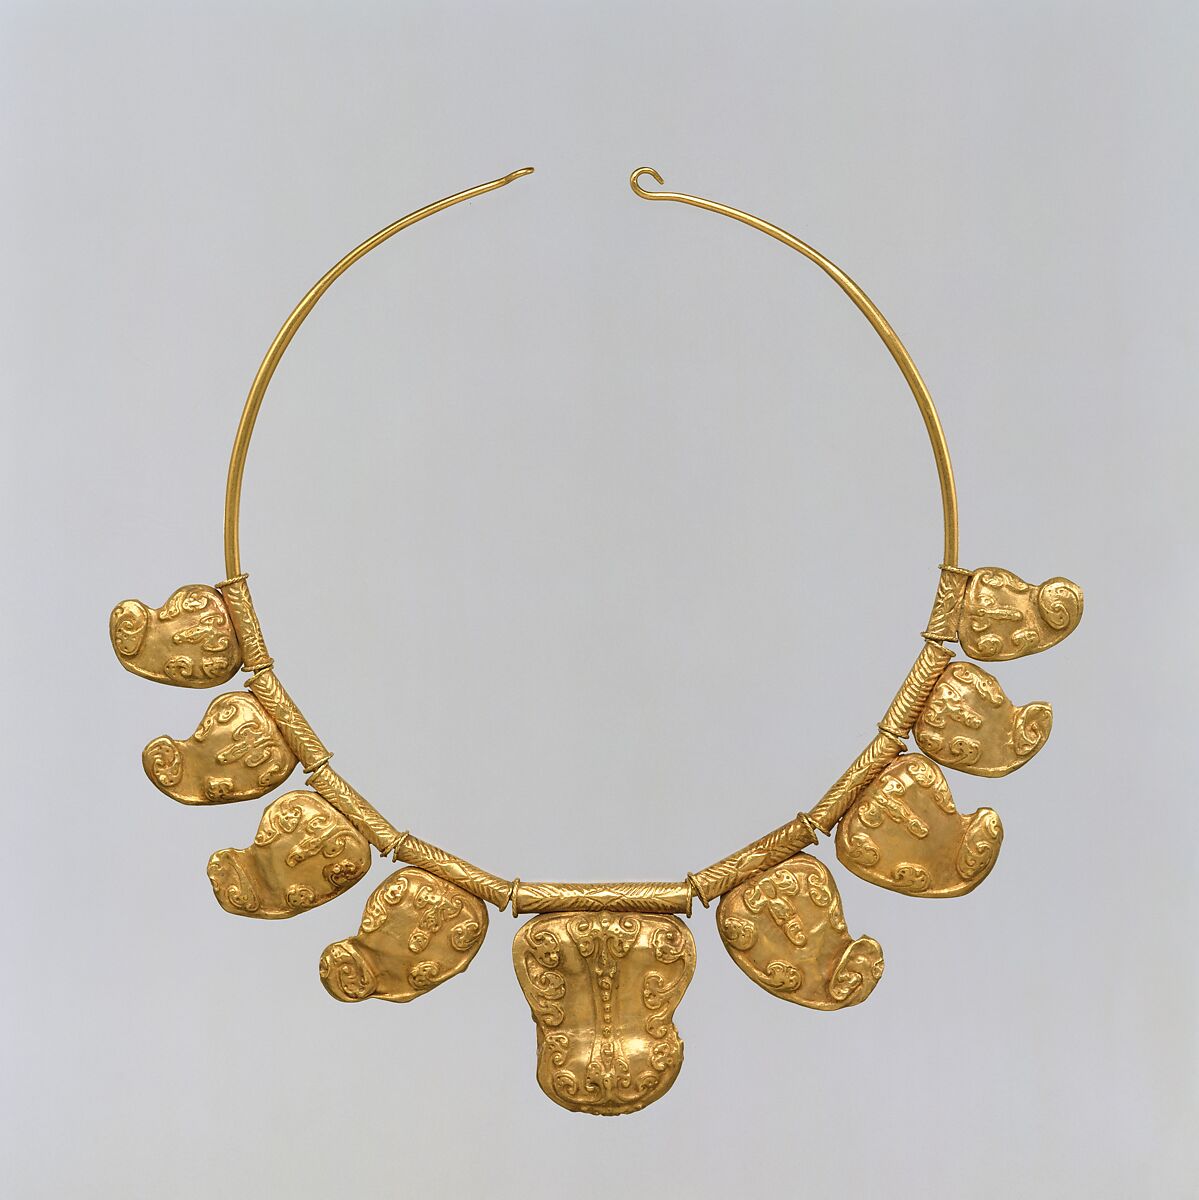 Tiger's Claw Necklace, Gold, repoussé, Indonesia (Central Java) 